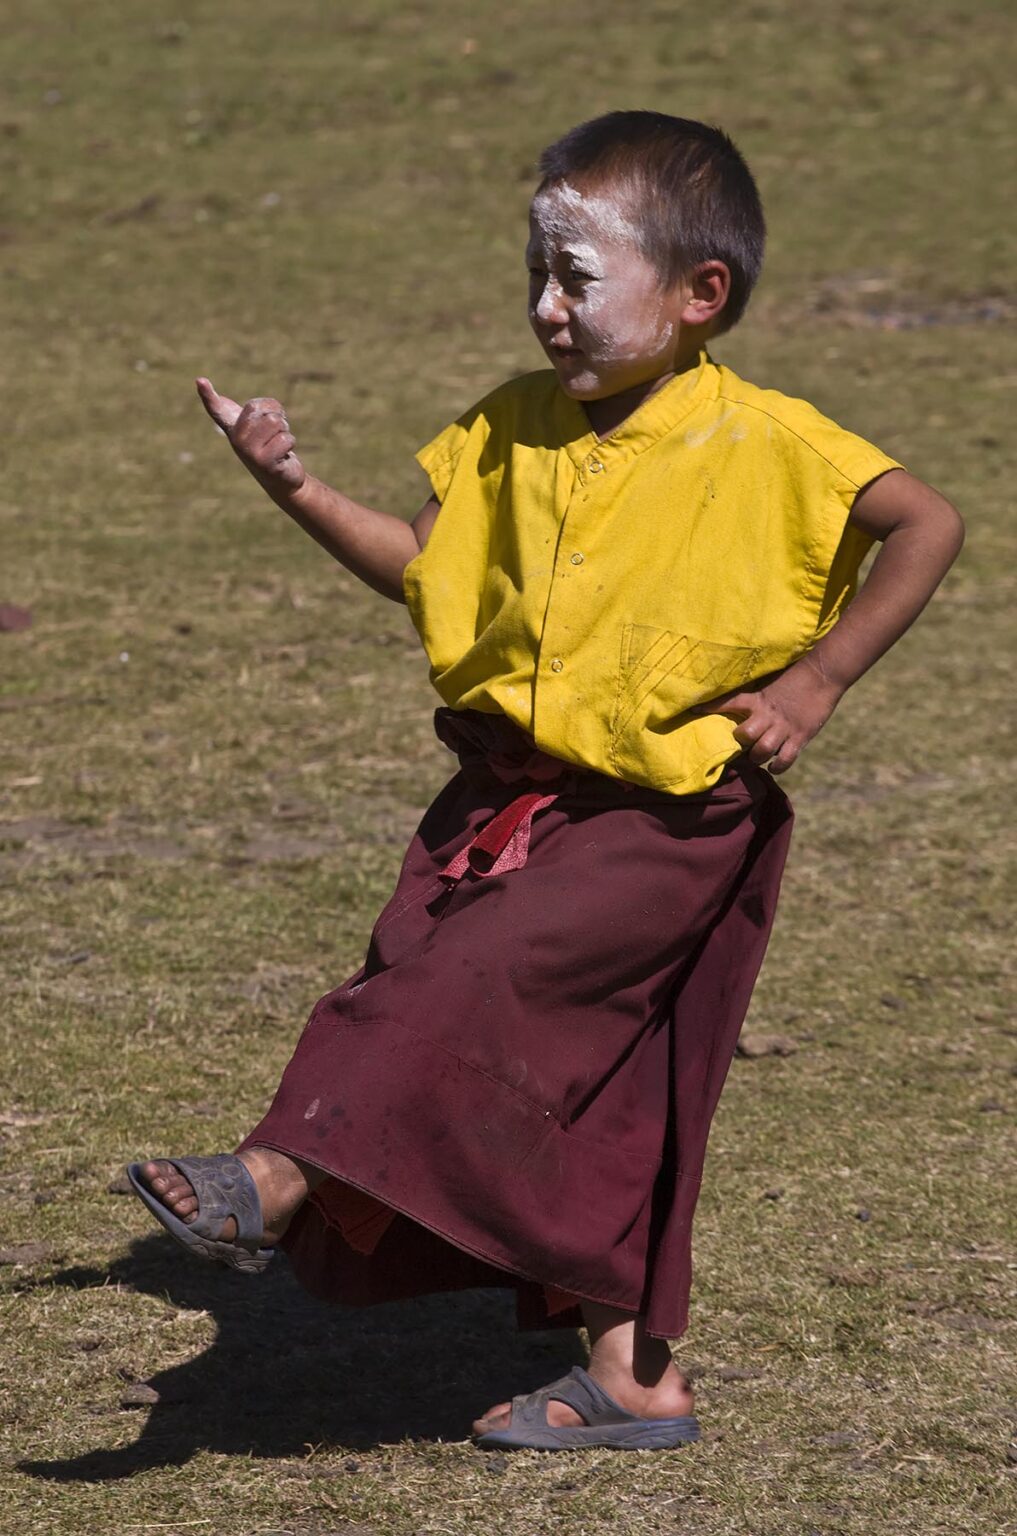 A young MONK practices tantric CHAM DANCING at a remote TIBETAN BUDDHIST MONASTERY - NEPAL HIMALAYA